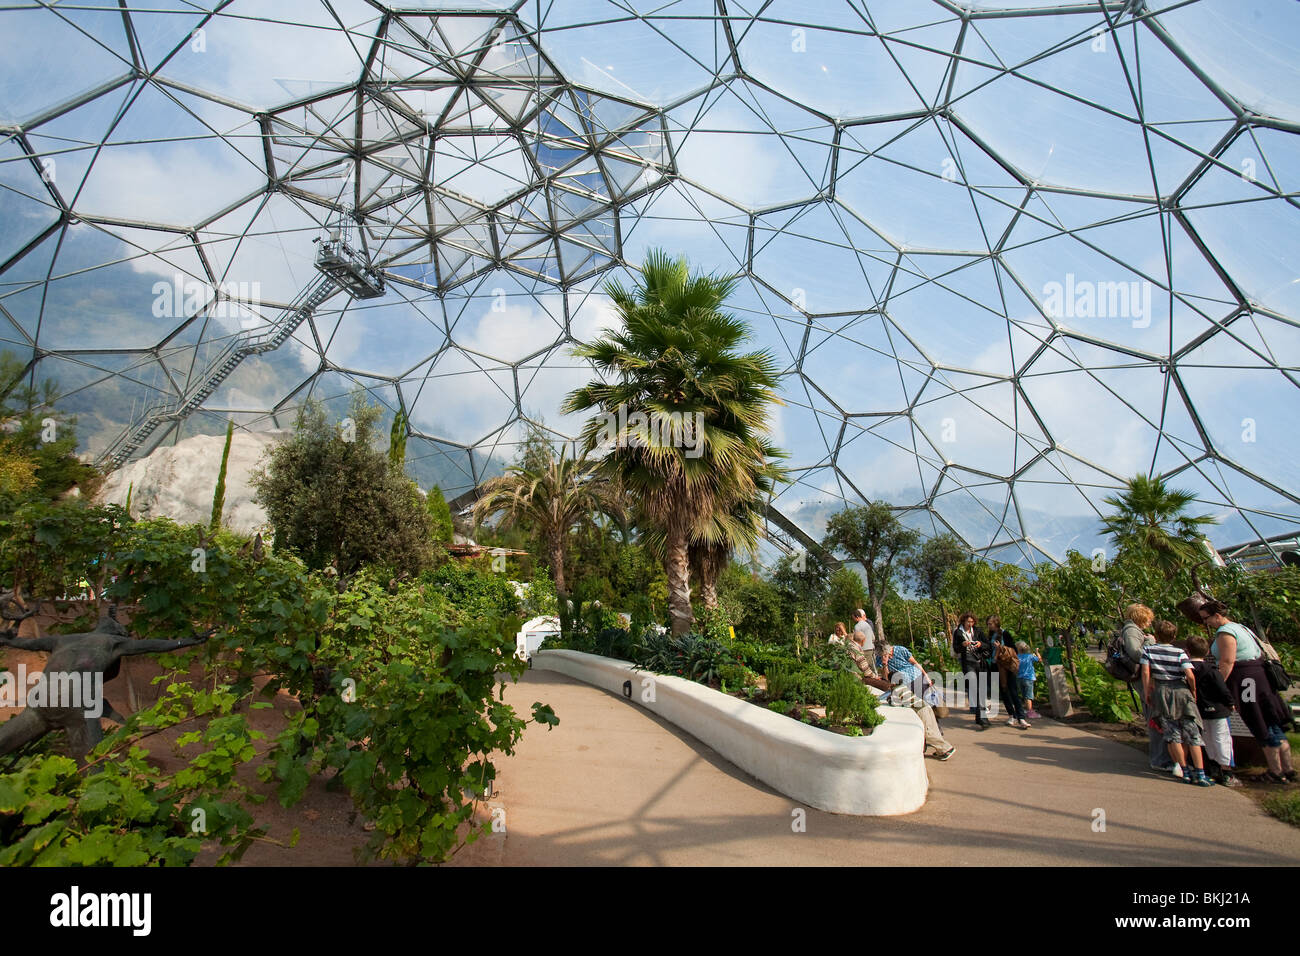 Warm temperate biome interior, The Eden Project, St Austell, Cornwall, UK Stock Photo